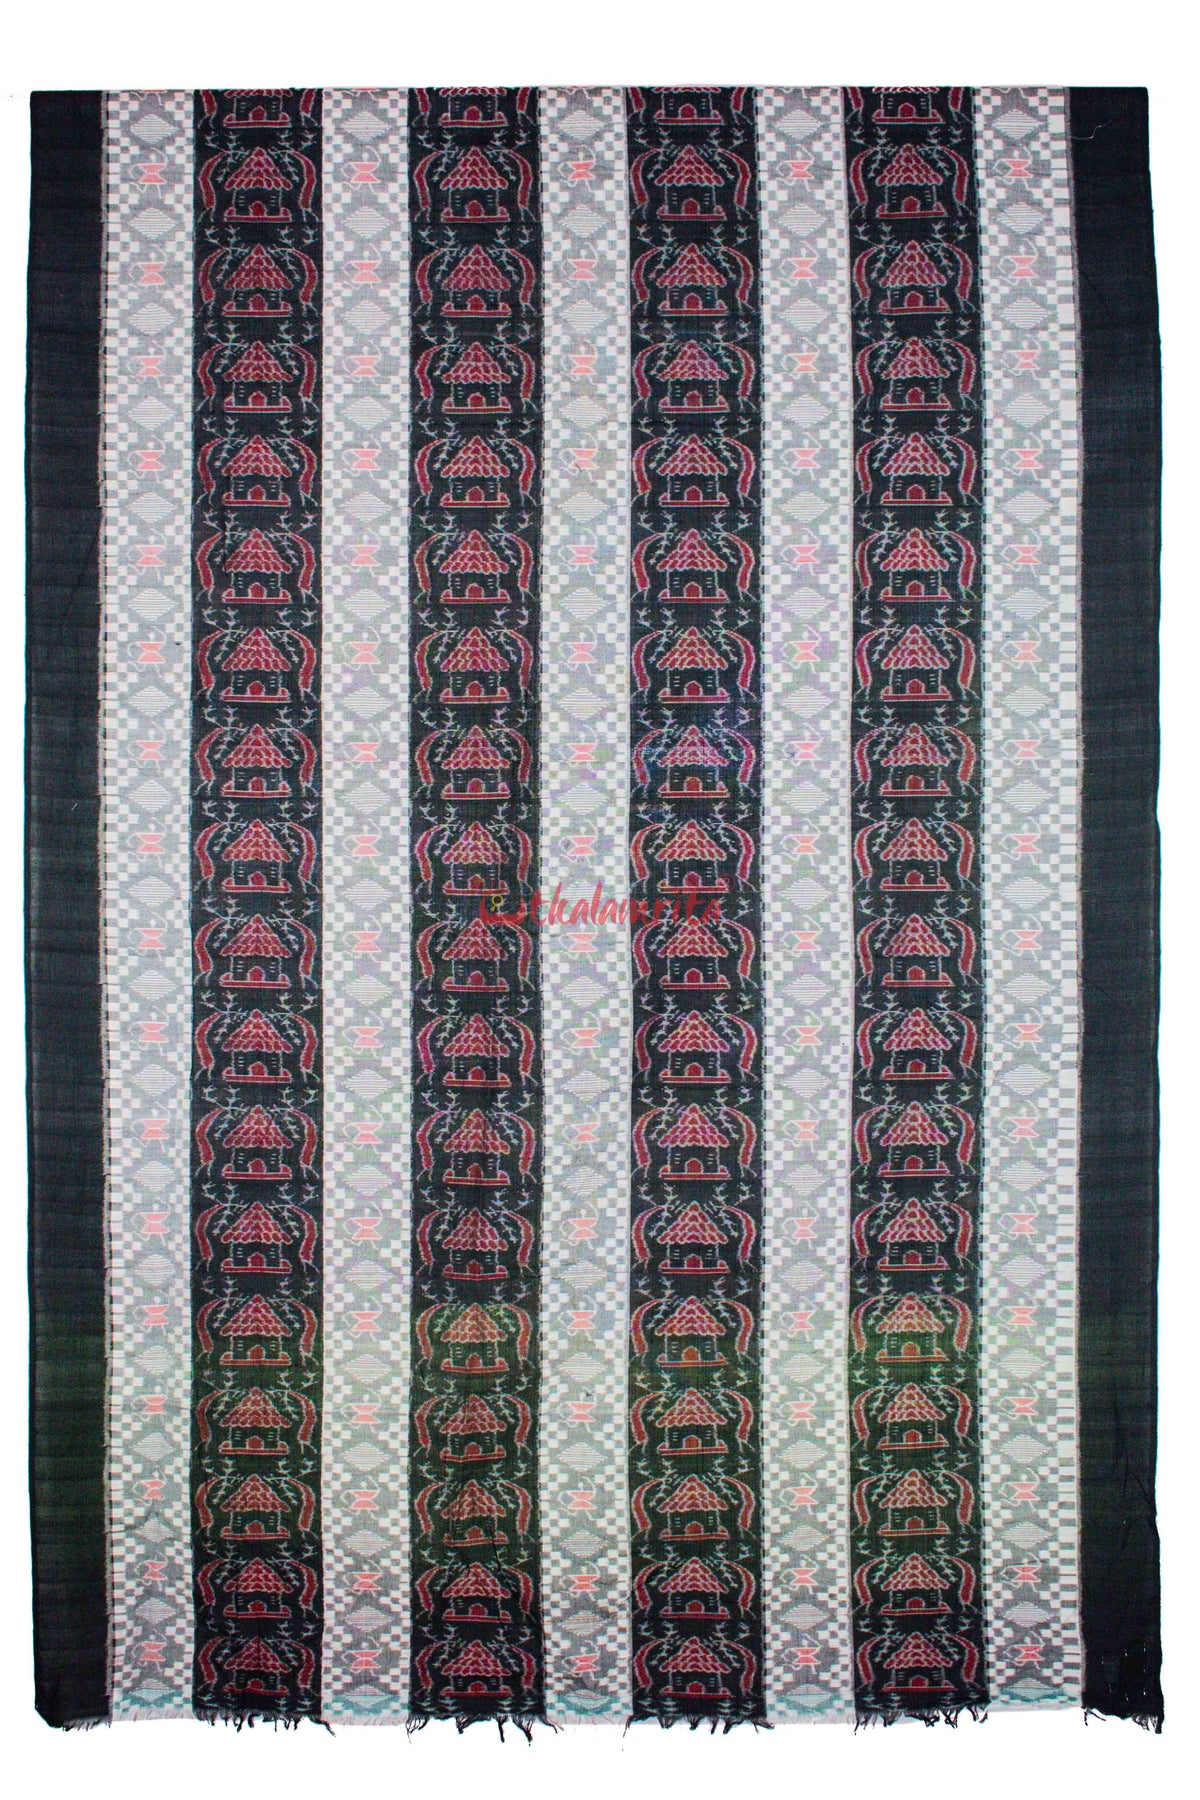 Black White House and tribals (Fabric)